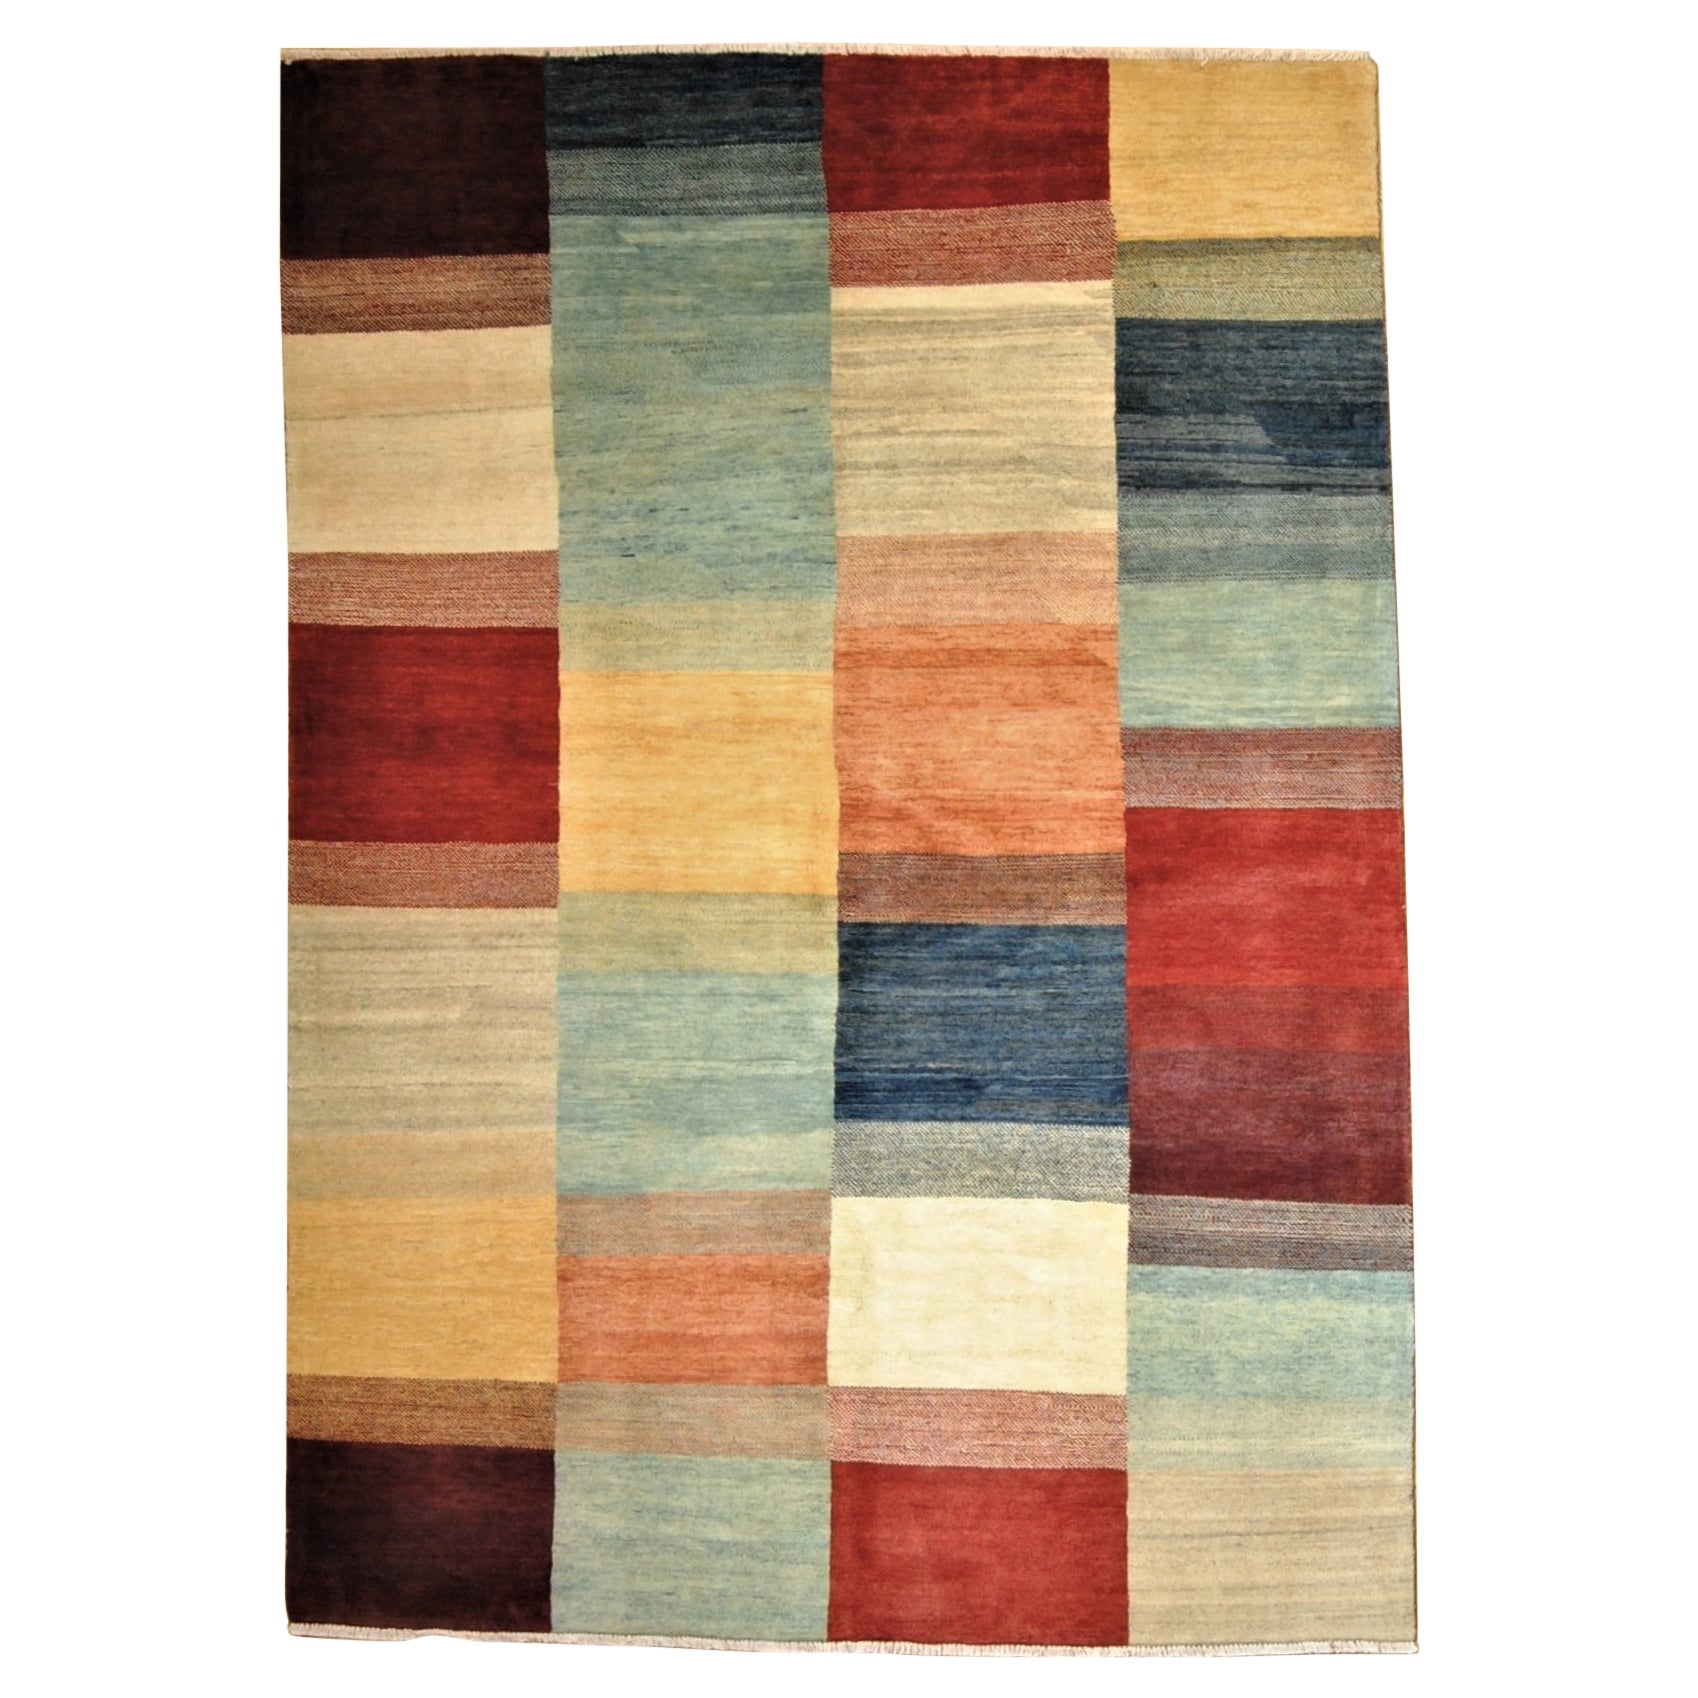 Multicolored rug from Afghanistan for modern decor For Sale